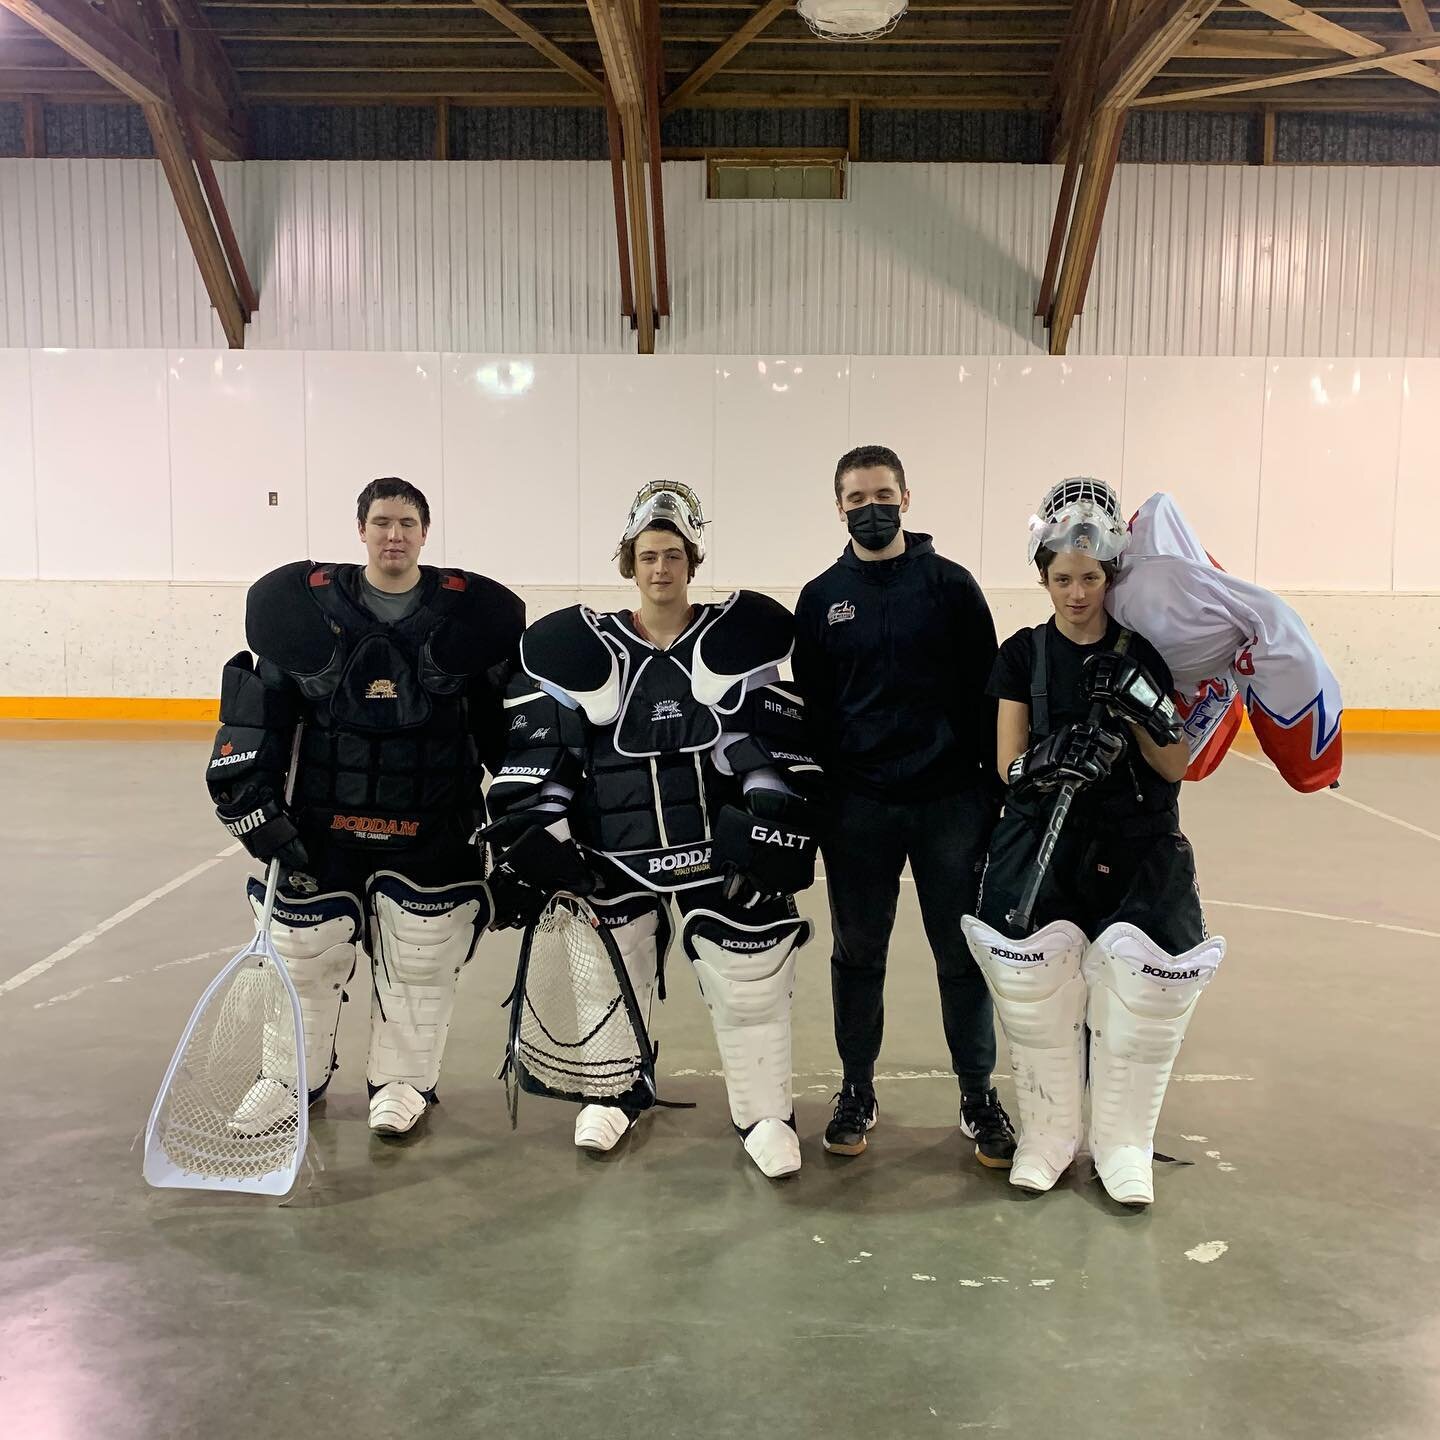 Shoutout to @ethanwoods35 for working with our goalies and giving them professional level expertise this weekend! We appreciate you!!